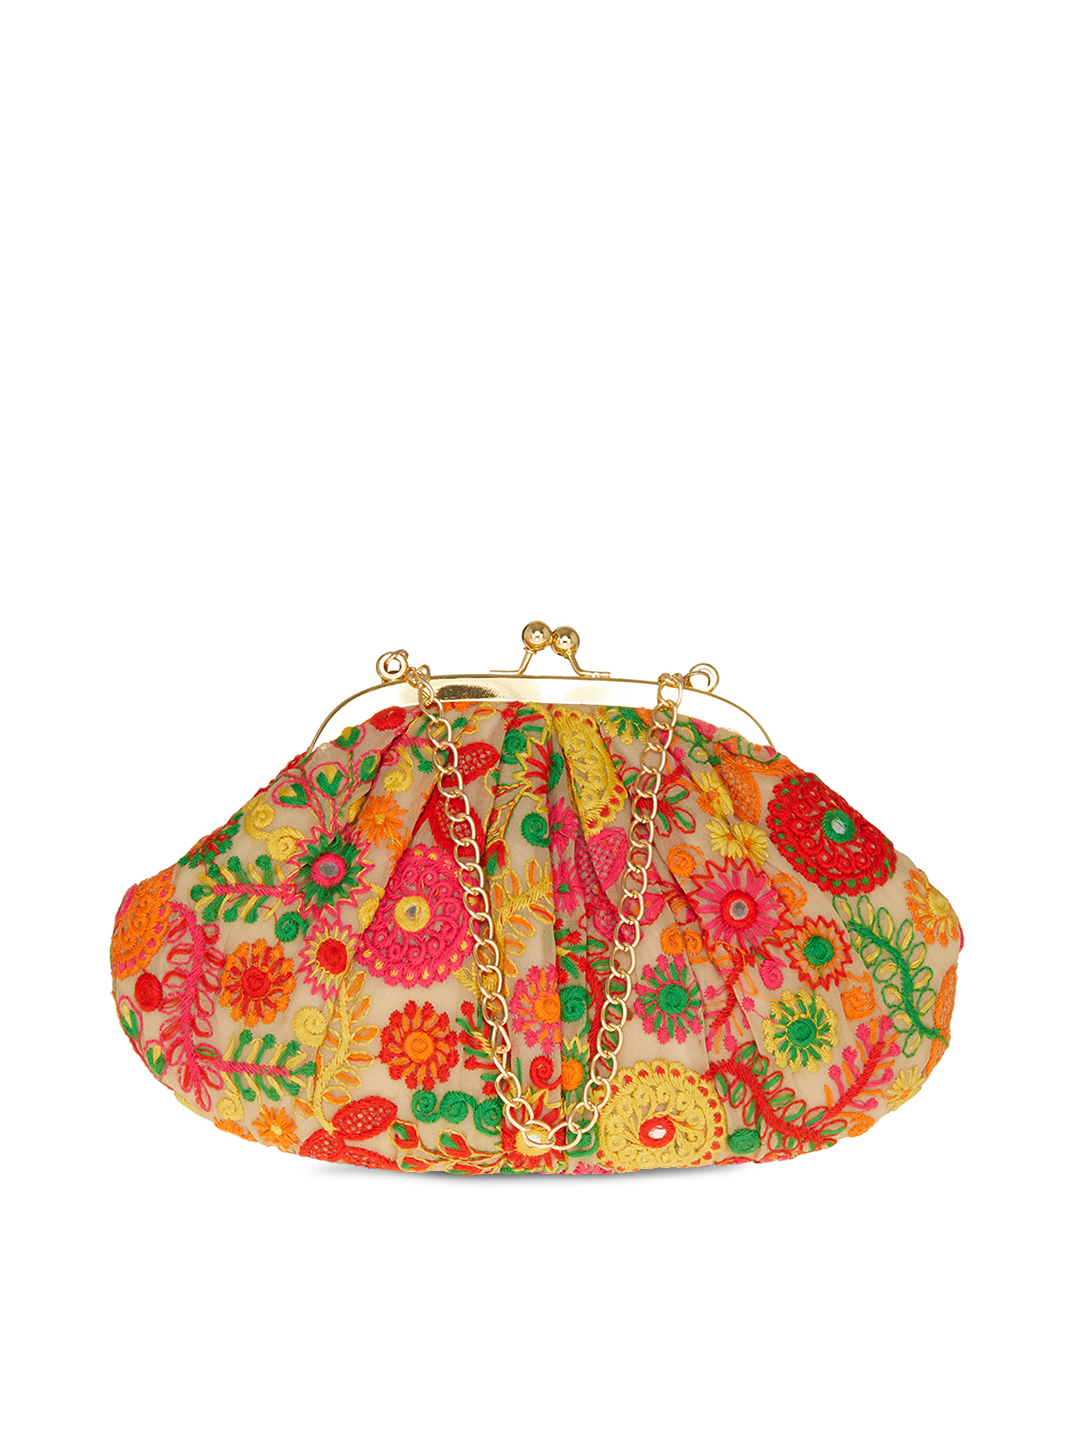 Multicoloured Embroidered Clutch